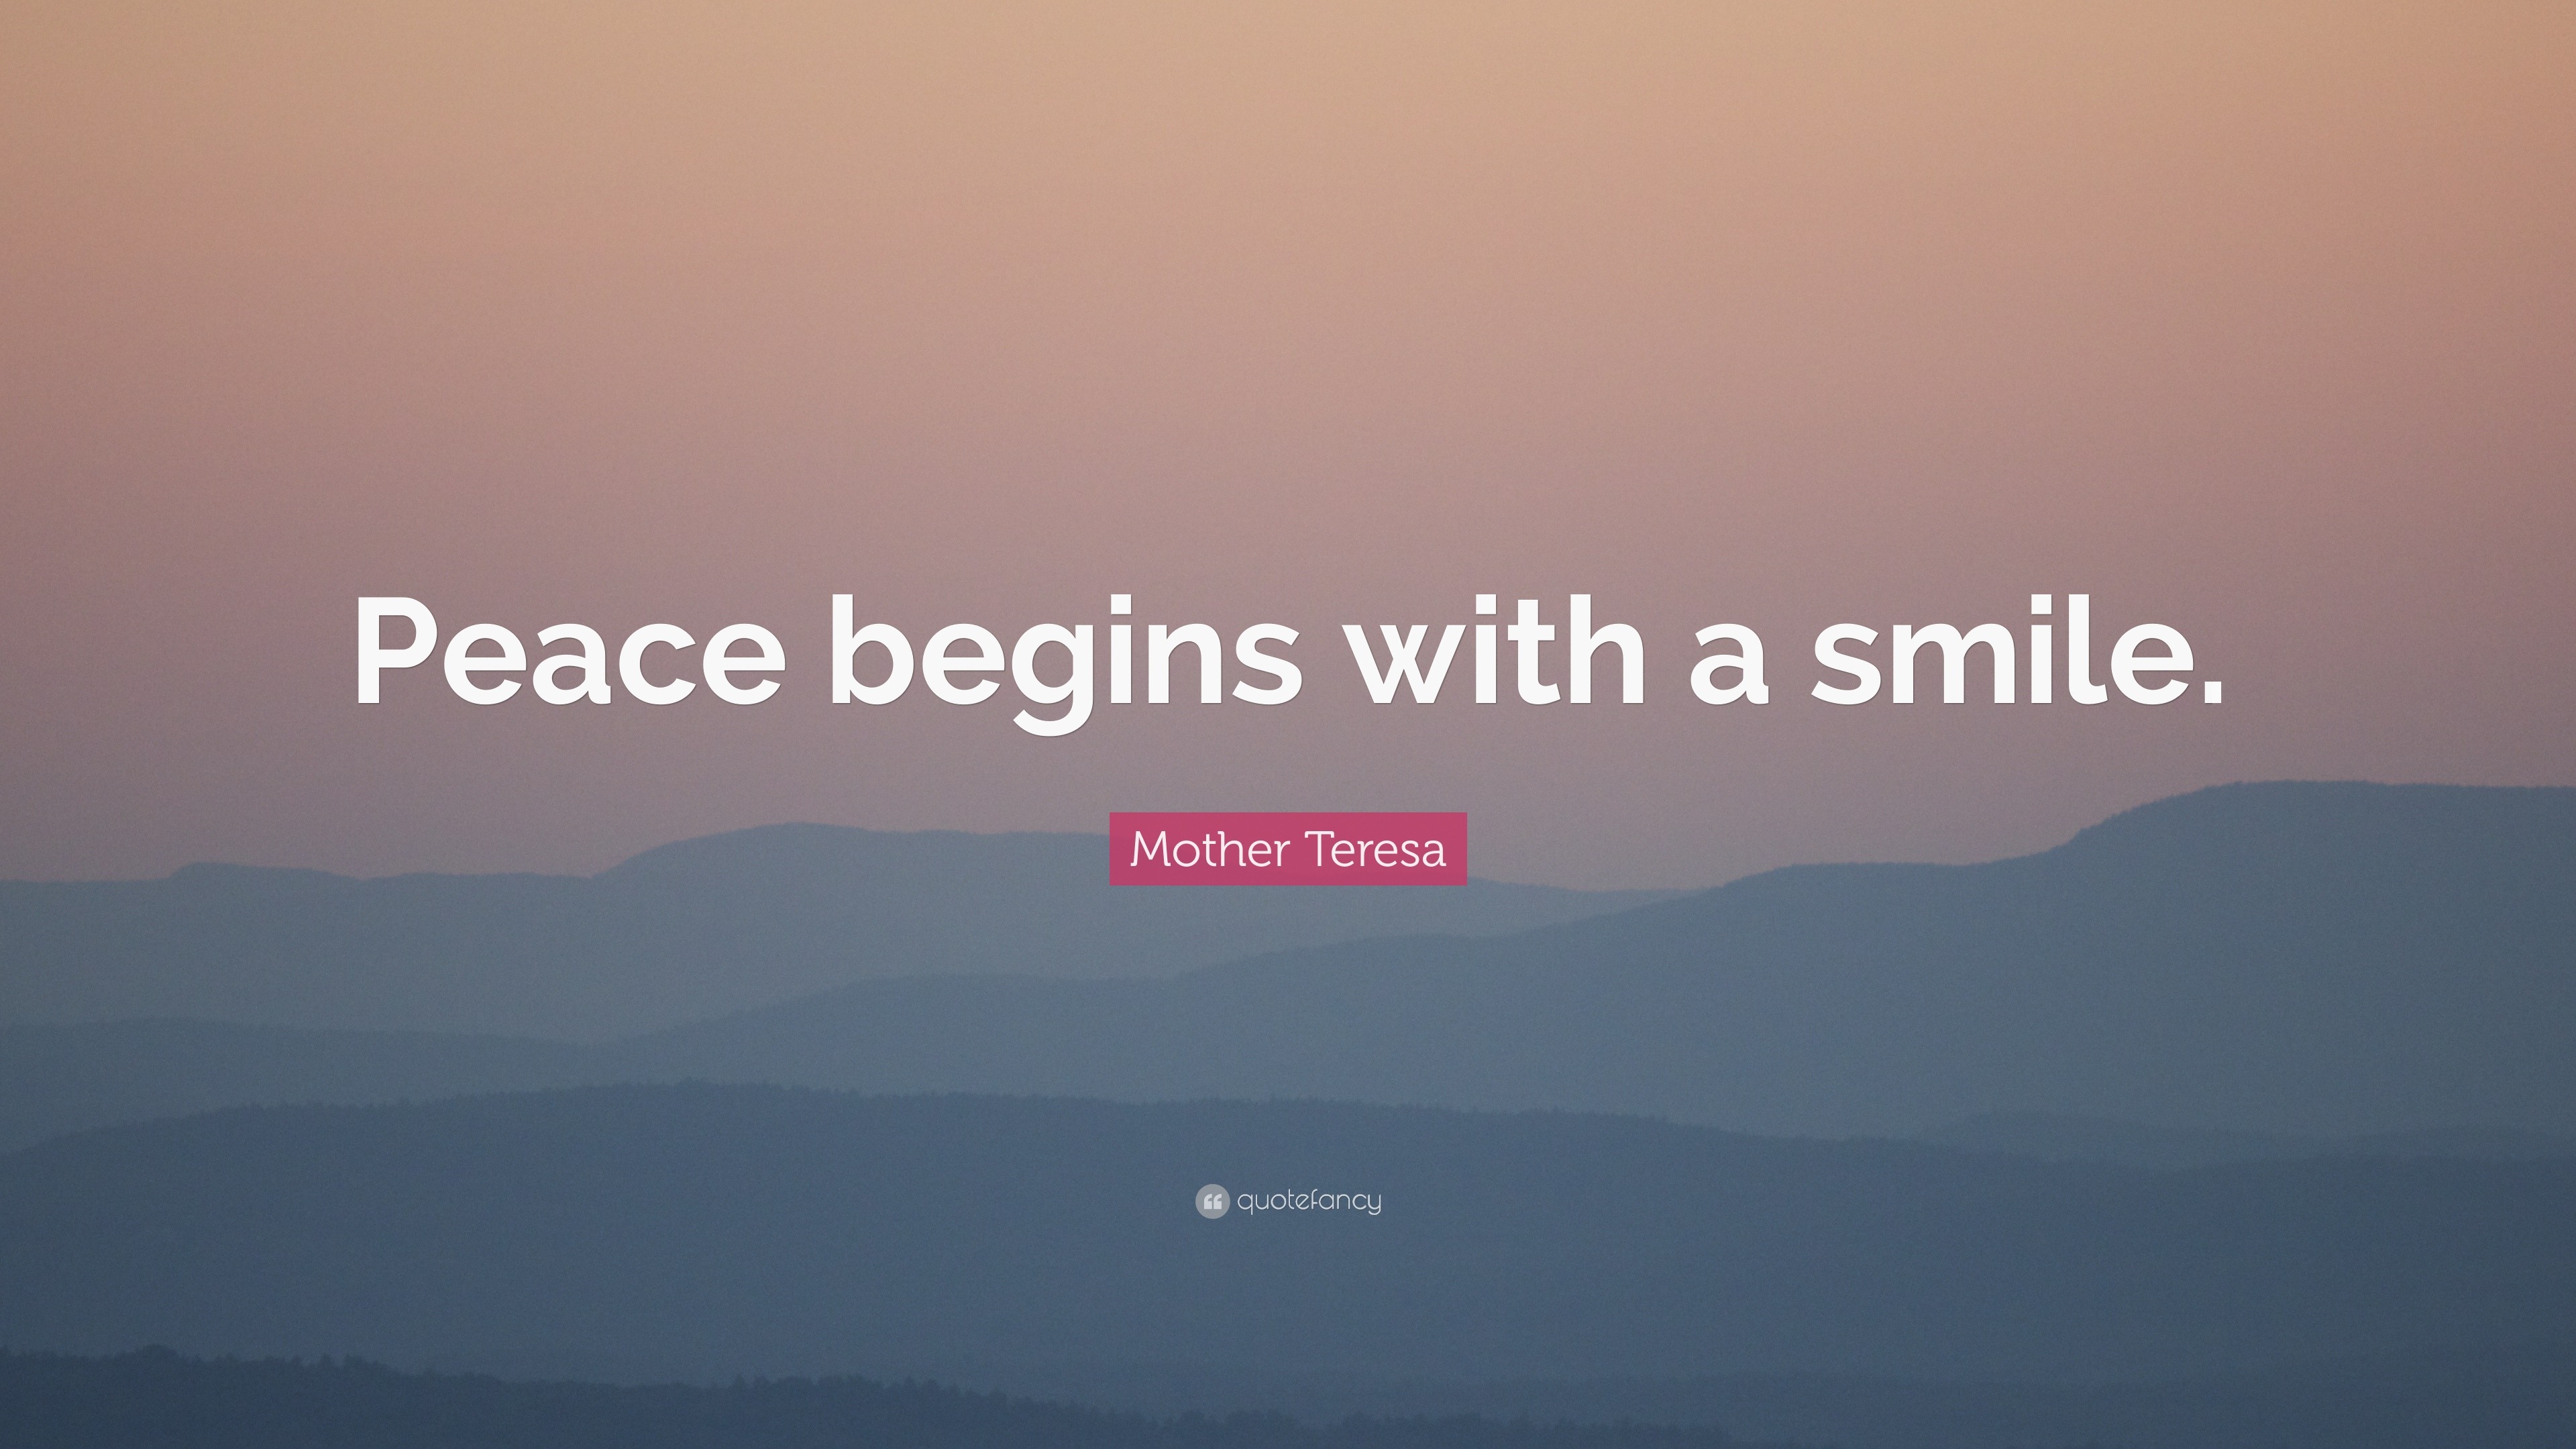 Mother Teresa Quote: “Peace begins with a smile.” (25 wallpapers